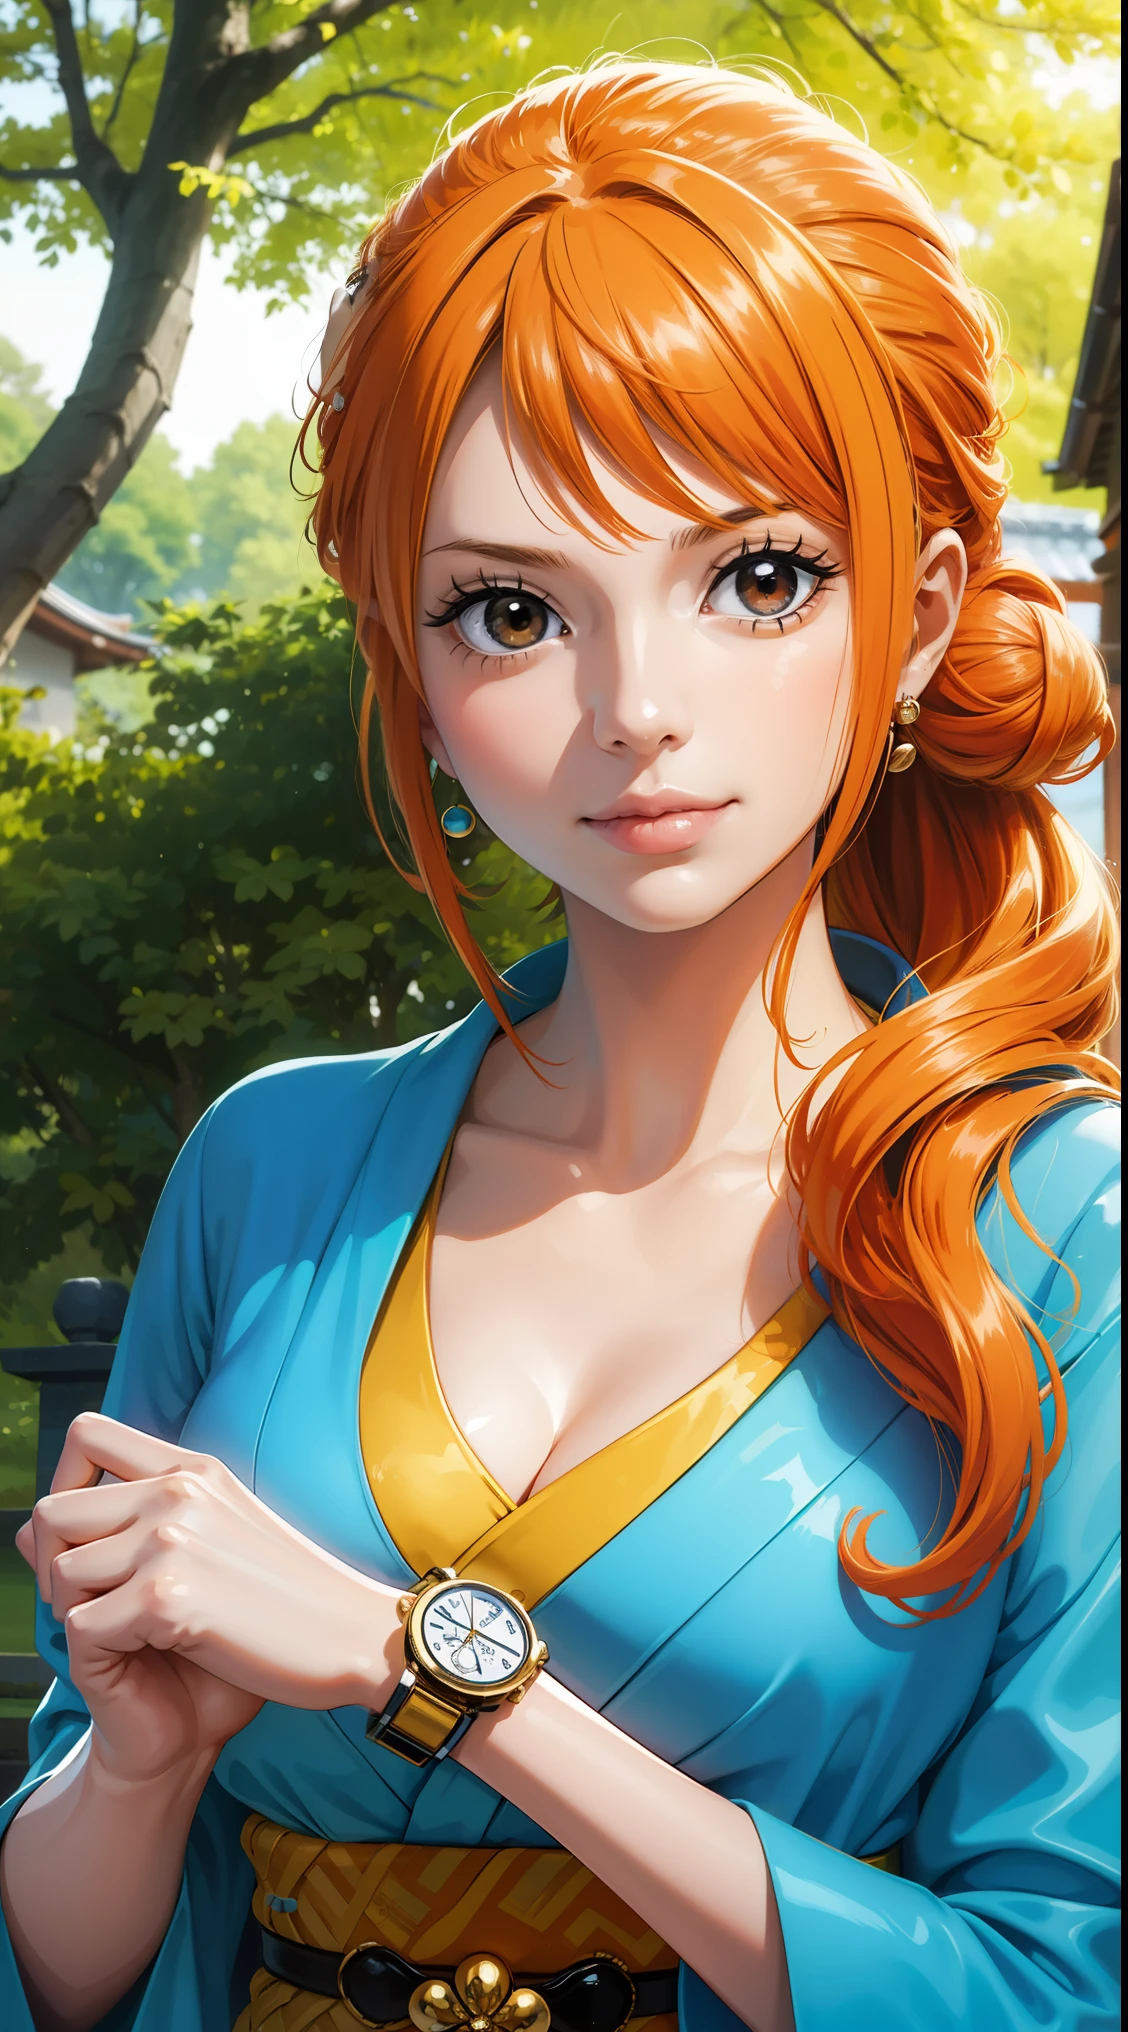 NamiFinal, Nami from the anime One Piece, orange hair, bangs, hair in a bun, beautiful, beautiful woman, perfect body, perfect breasts, wearing a kimono, wearing earrings, wearing a watch, in the park, cherry tree, traditional house japan, looking at viewer, slight smile, realism, masterpiece, textured leather, super detail, high detail, high quality, best quality, 1080p, 16k